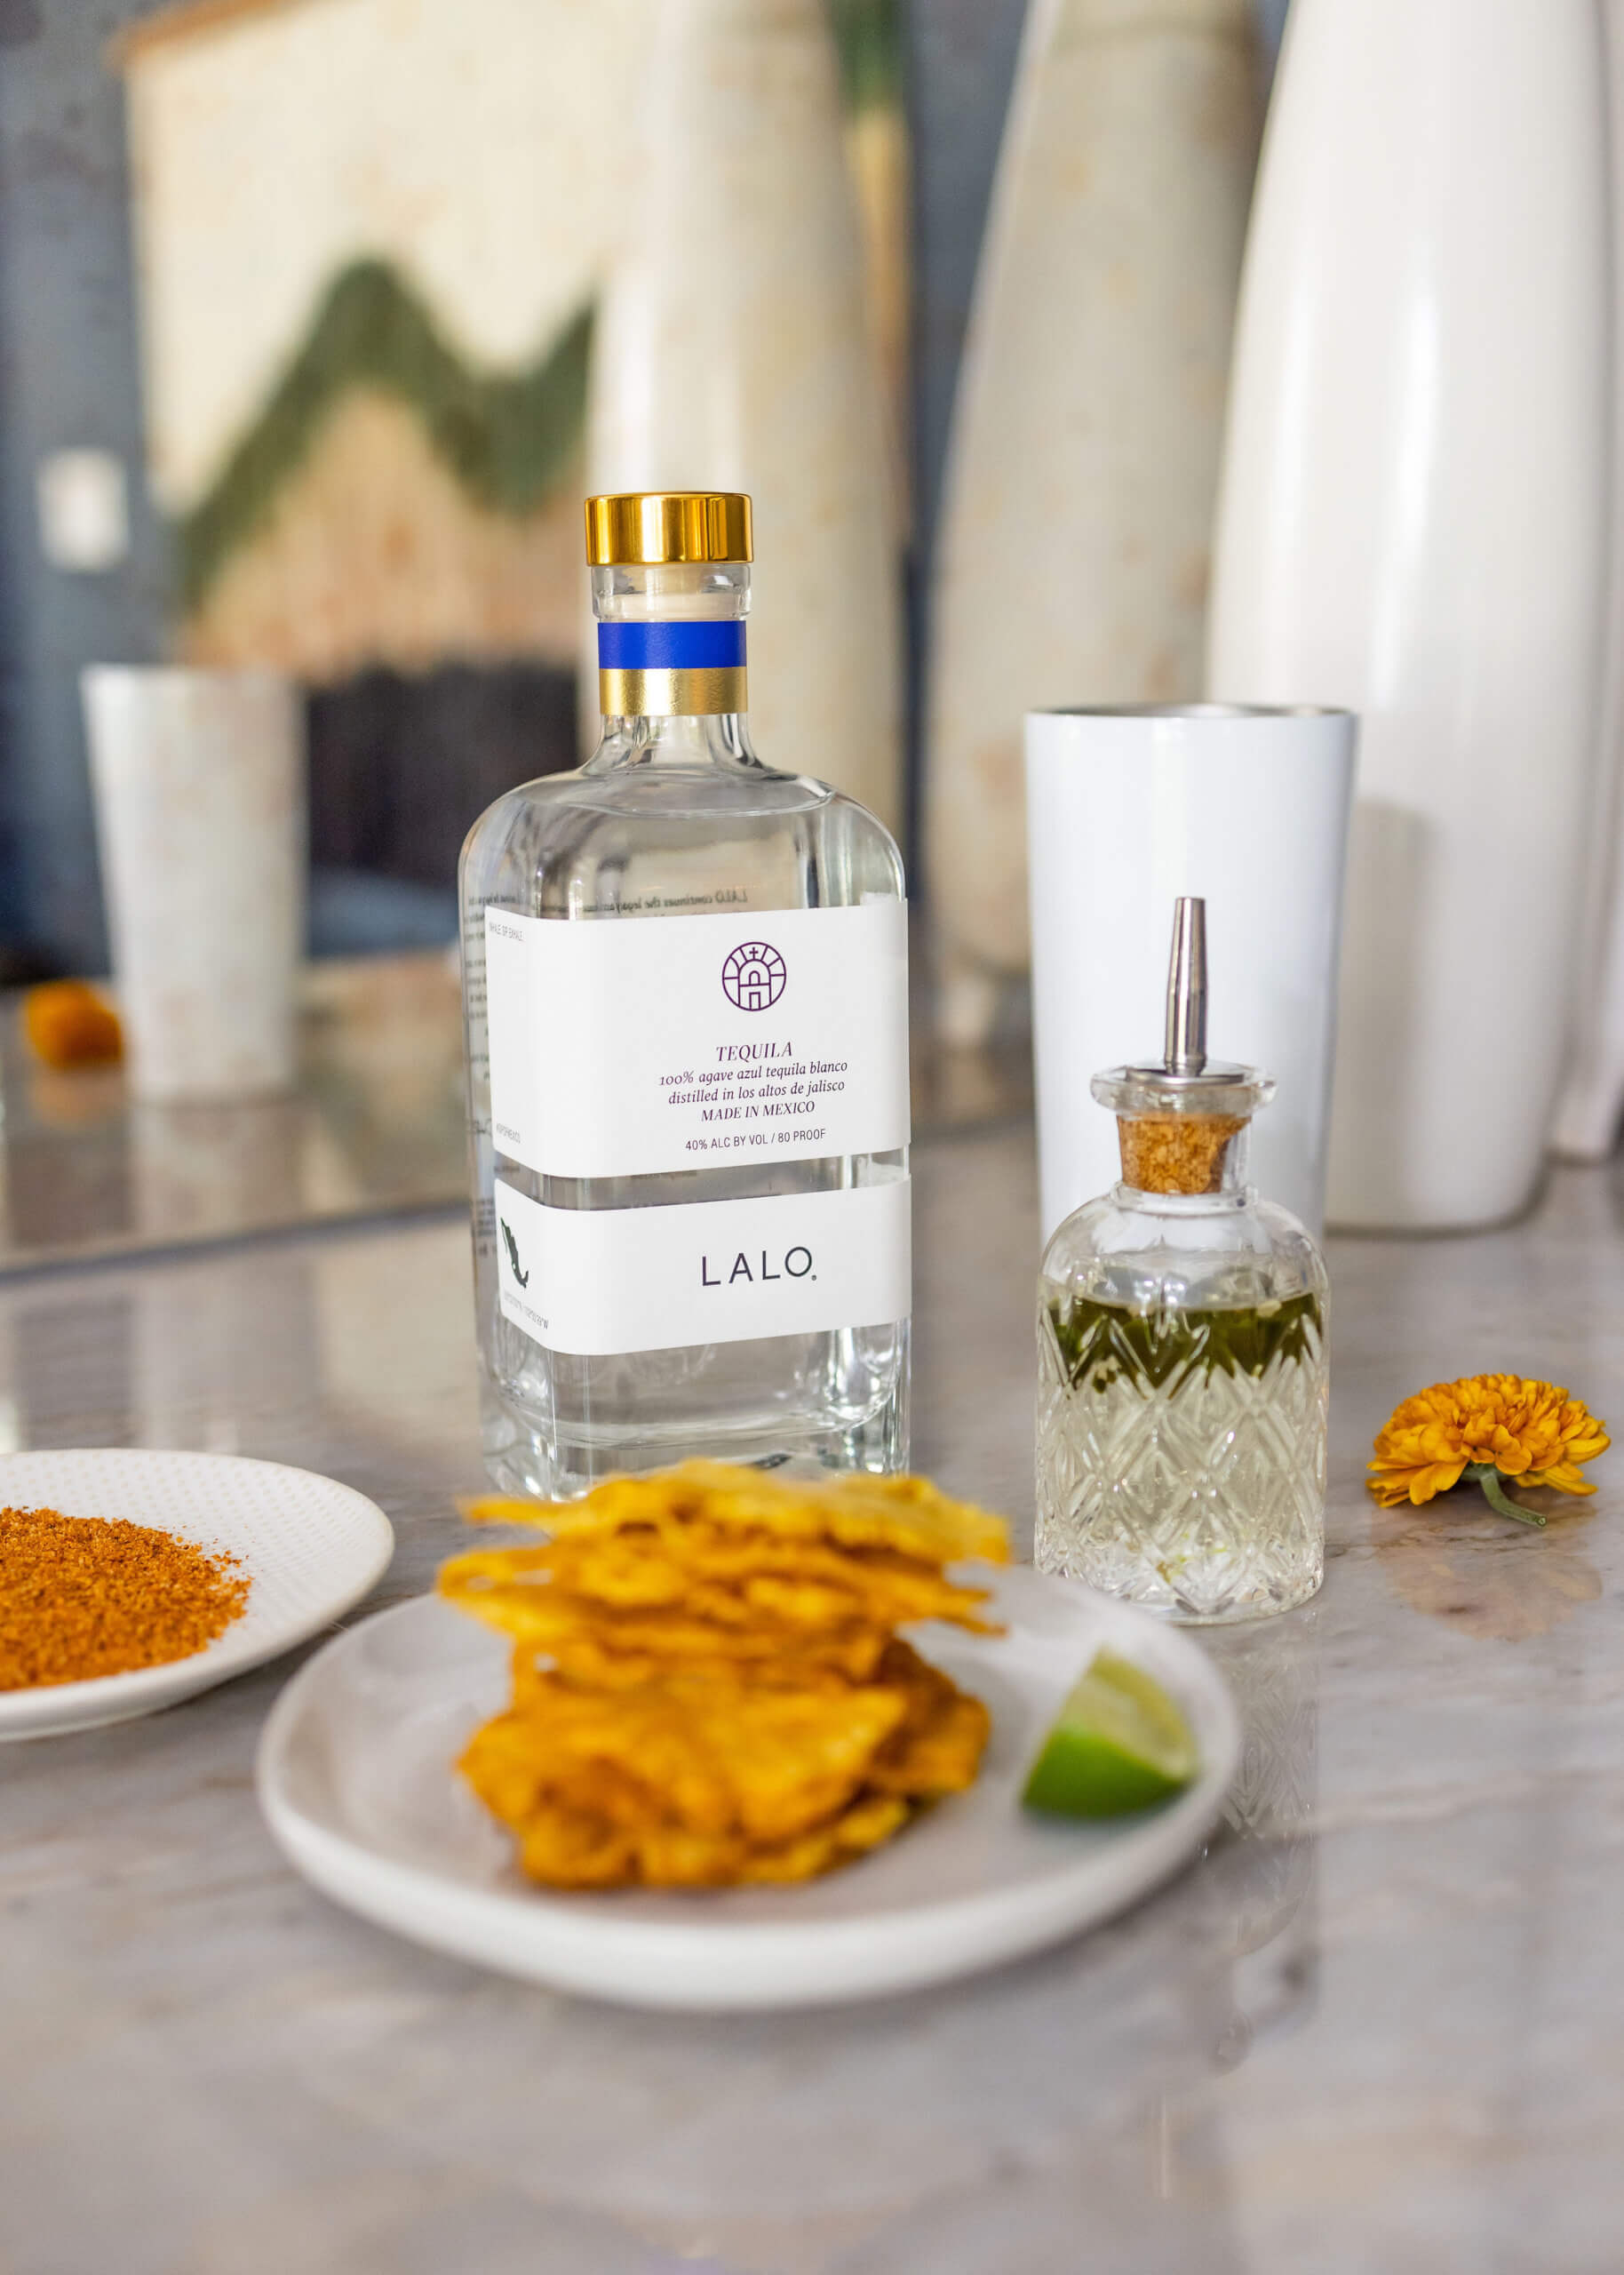 A tequila bottle, a crystal bottle and a plate with dried pineapple with a lime slice.  